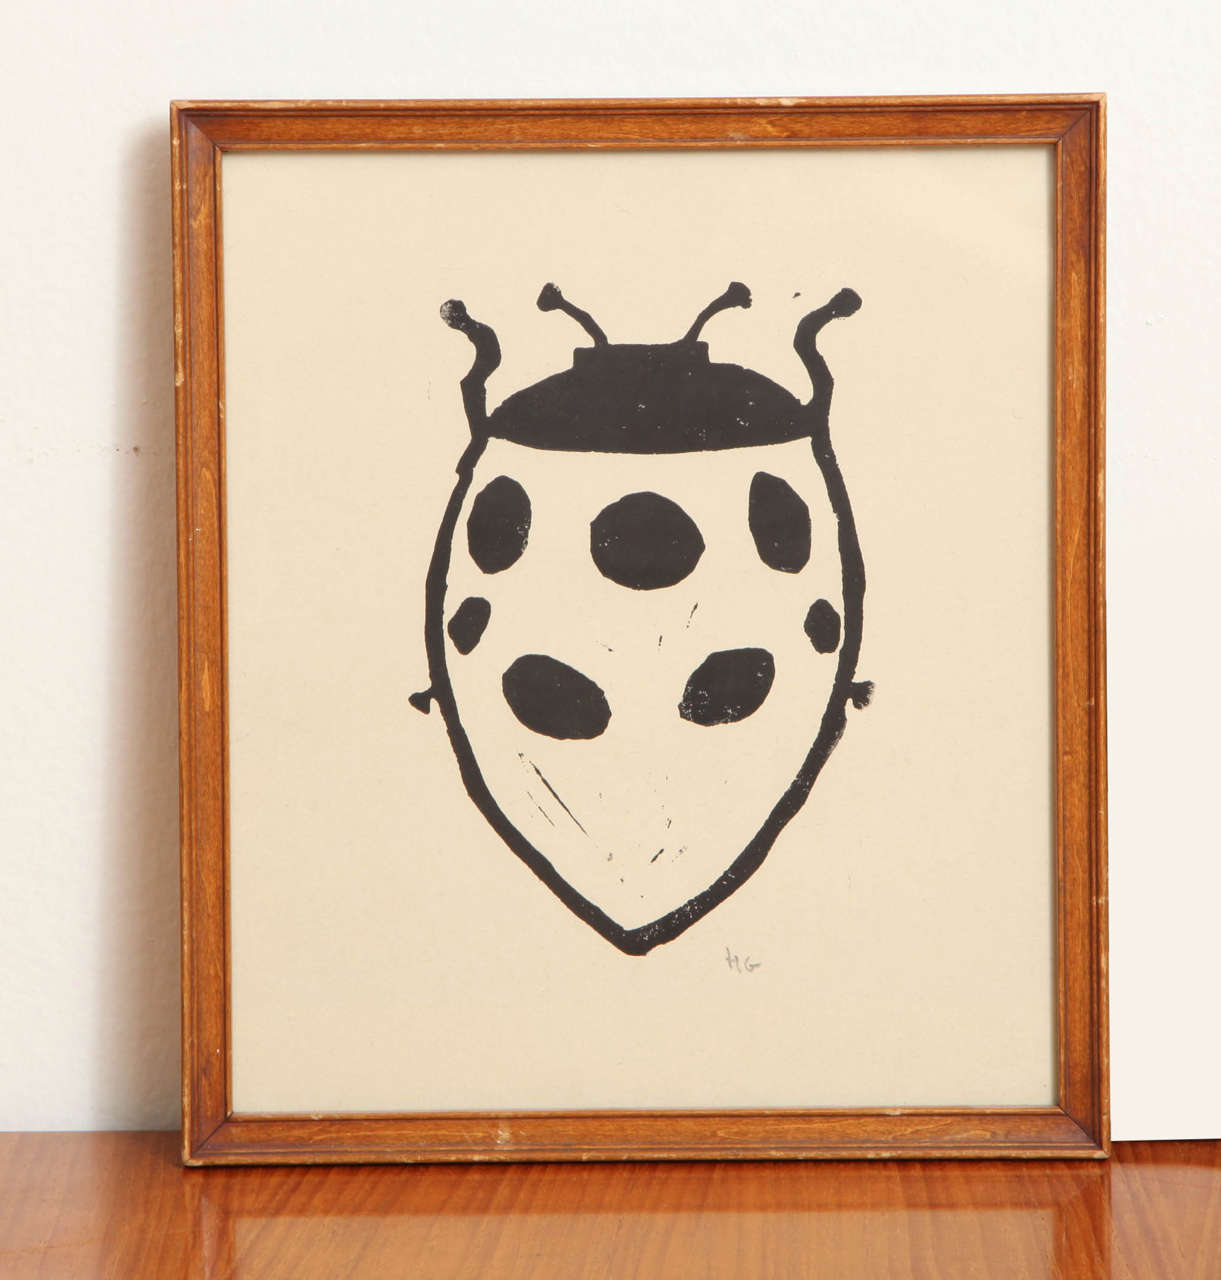 Small ladybug print by Hugo Guinness in wood frame. India ink on paper.